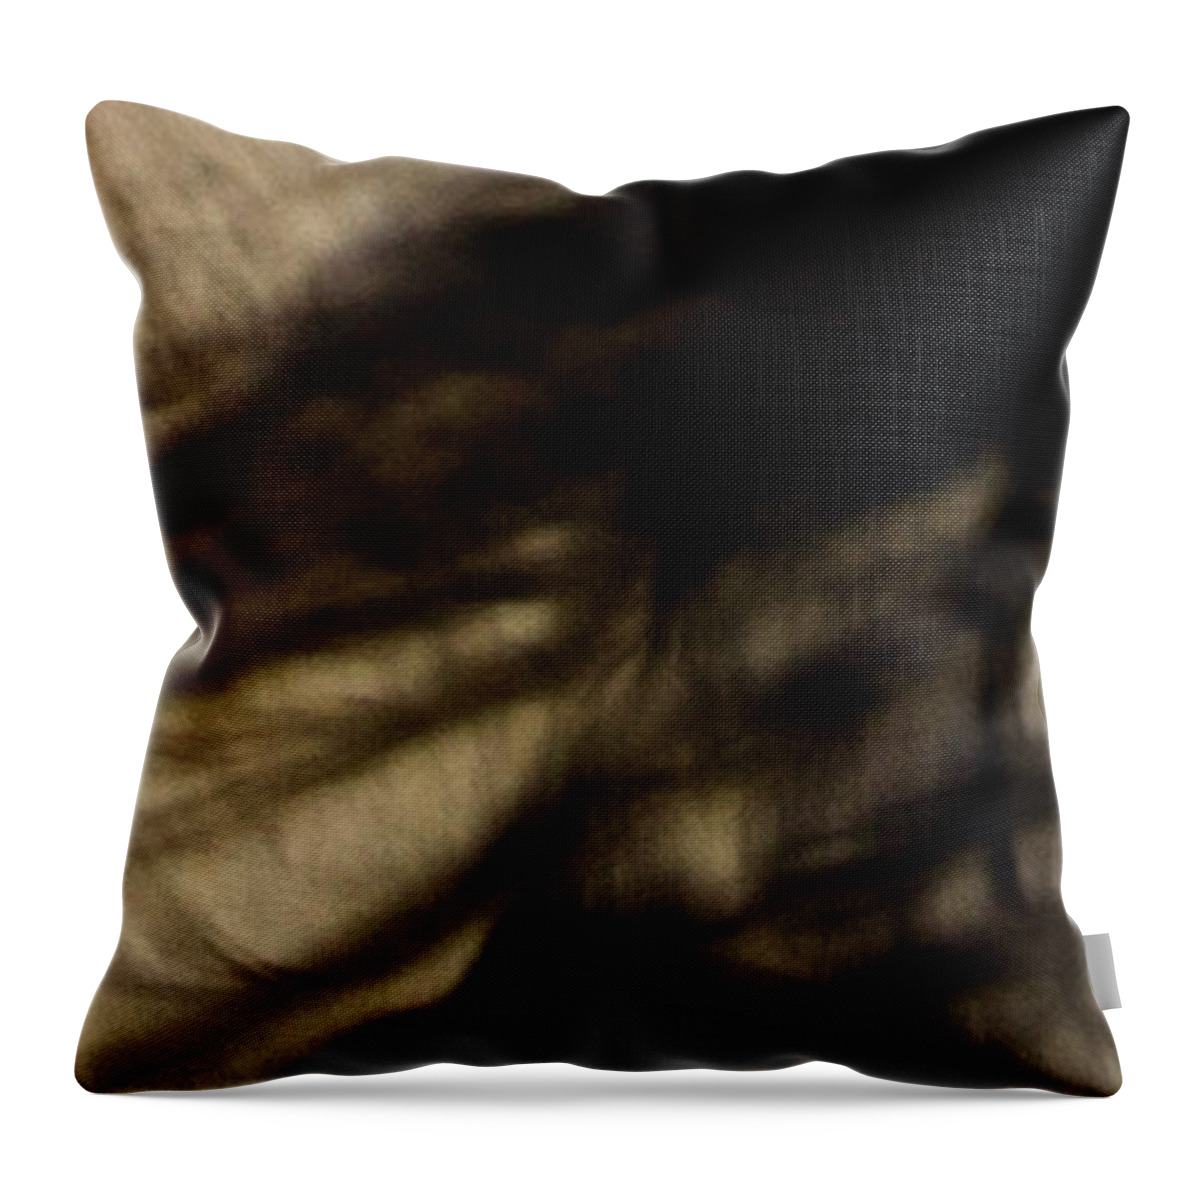 Andalusia Throw Pillow featuring the photograph Americano 8 by Catherine Sobredo